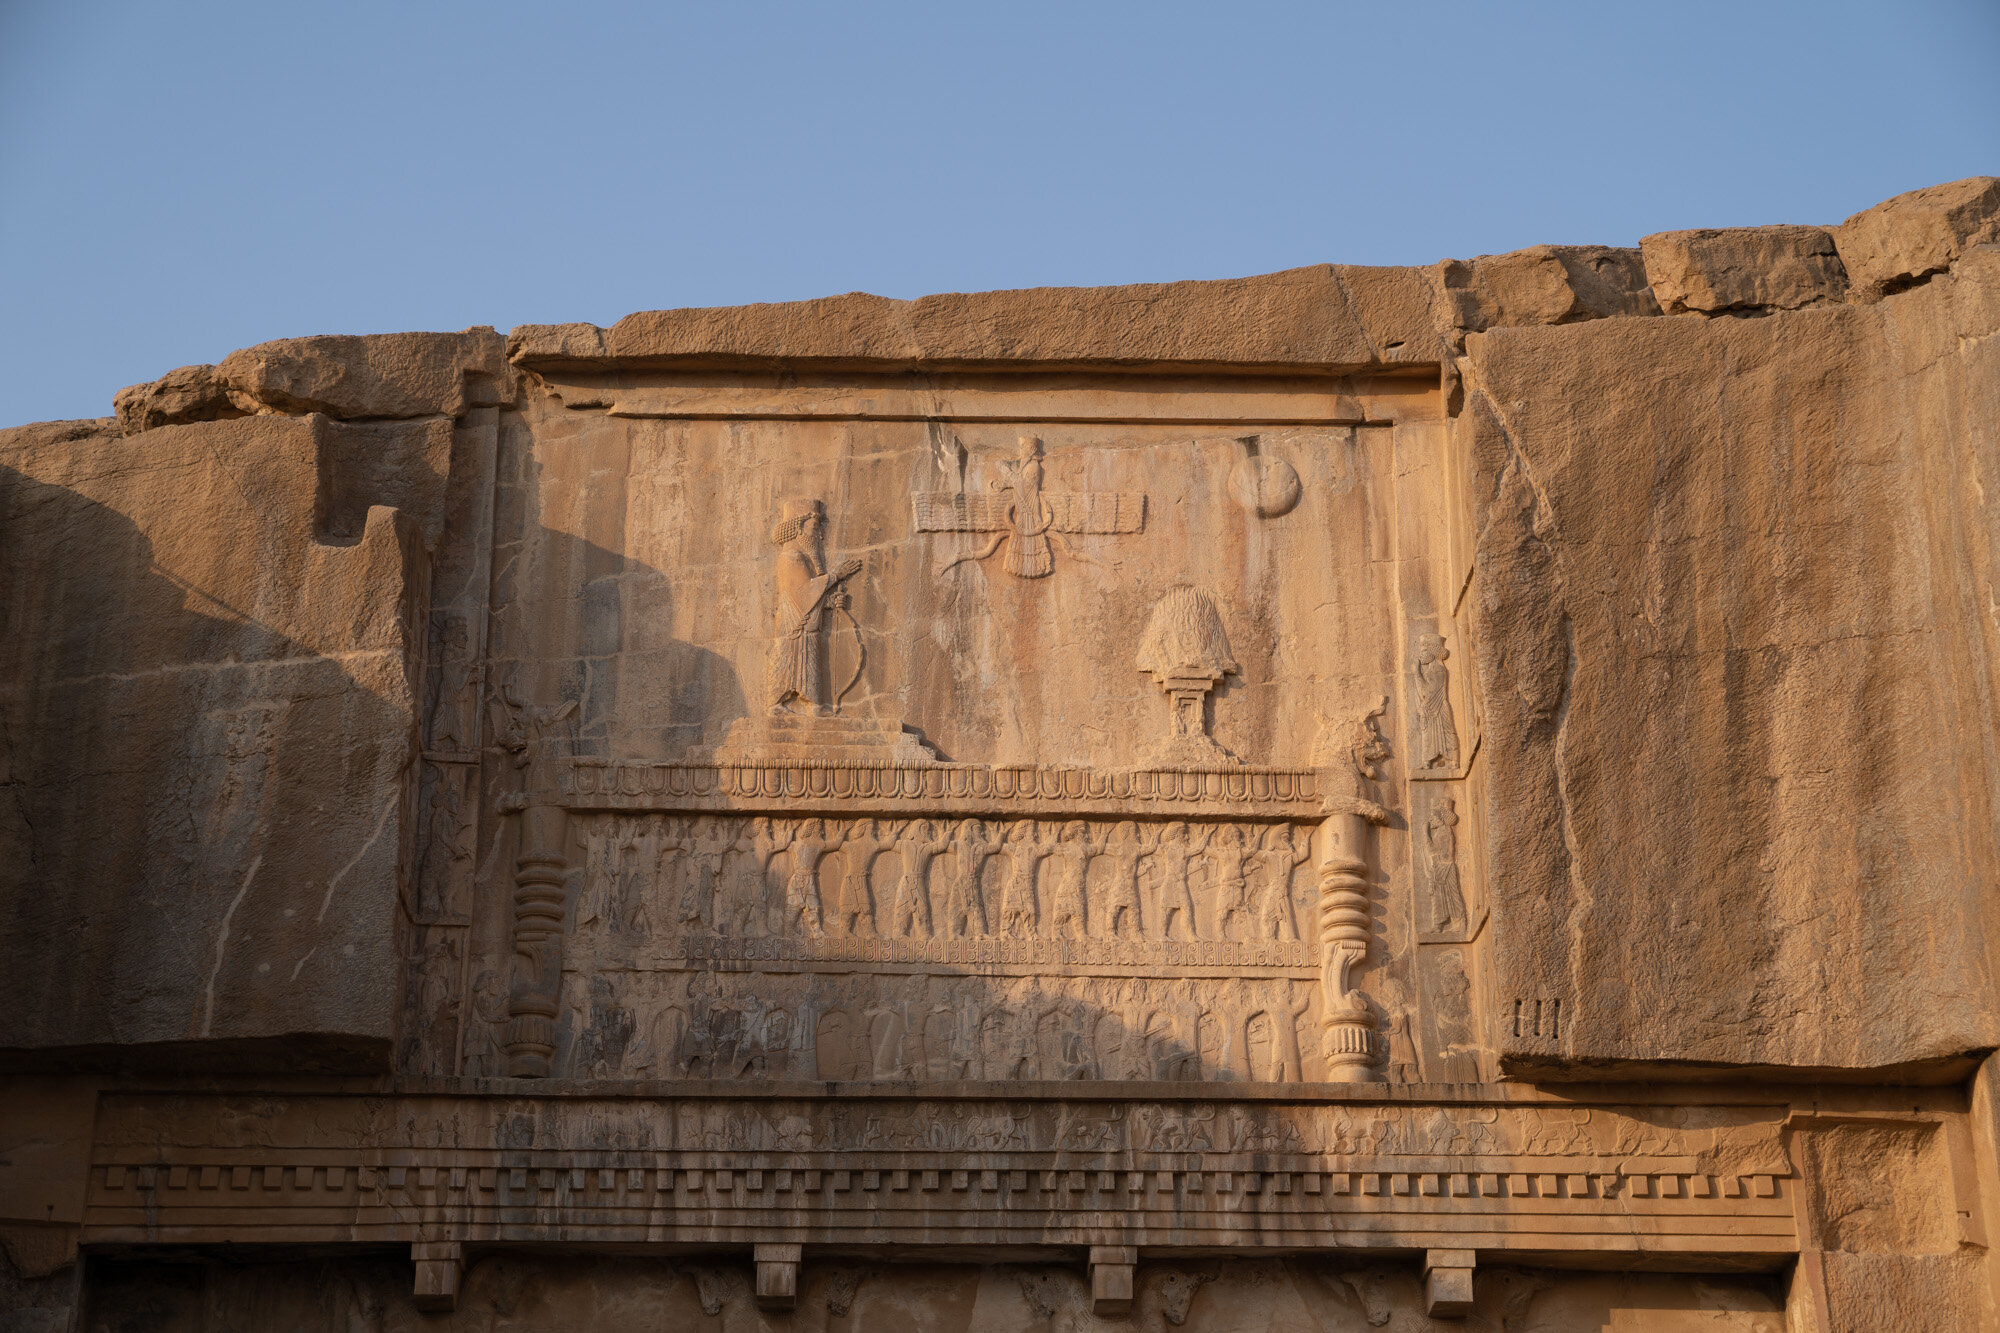  The symbol of Zoroastrianism - the Faravahar  -  carved into one of the tombs at Persepolis 